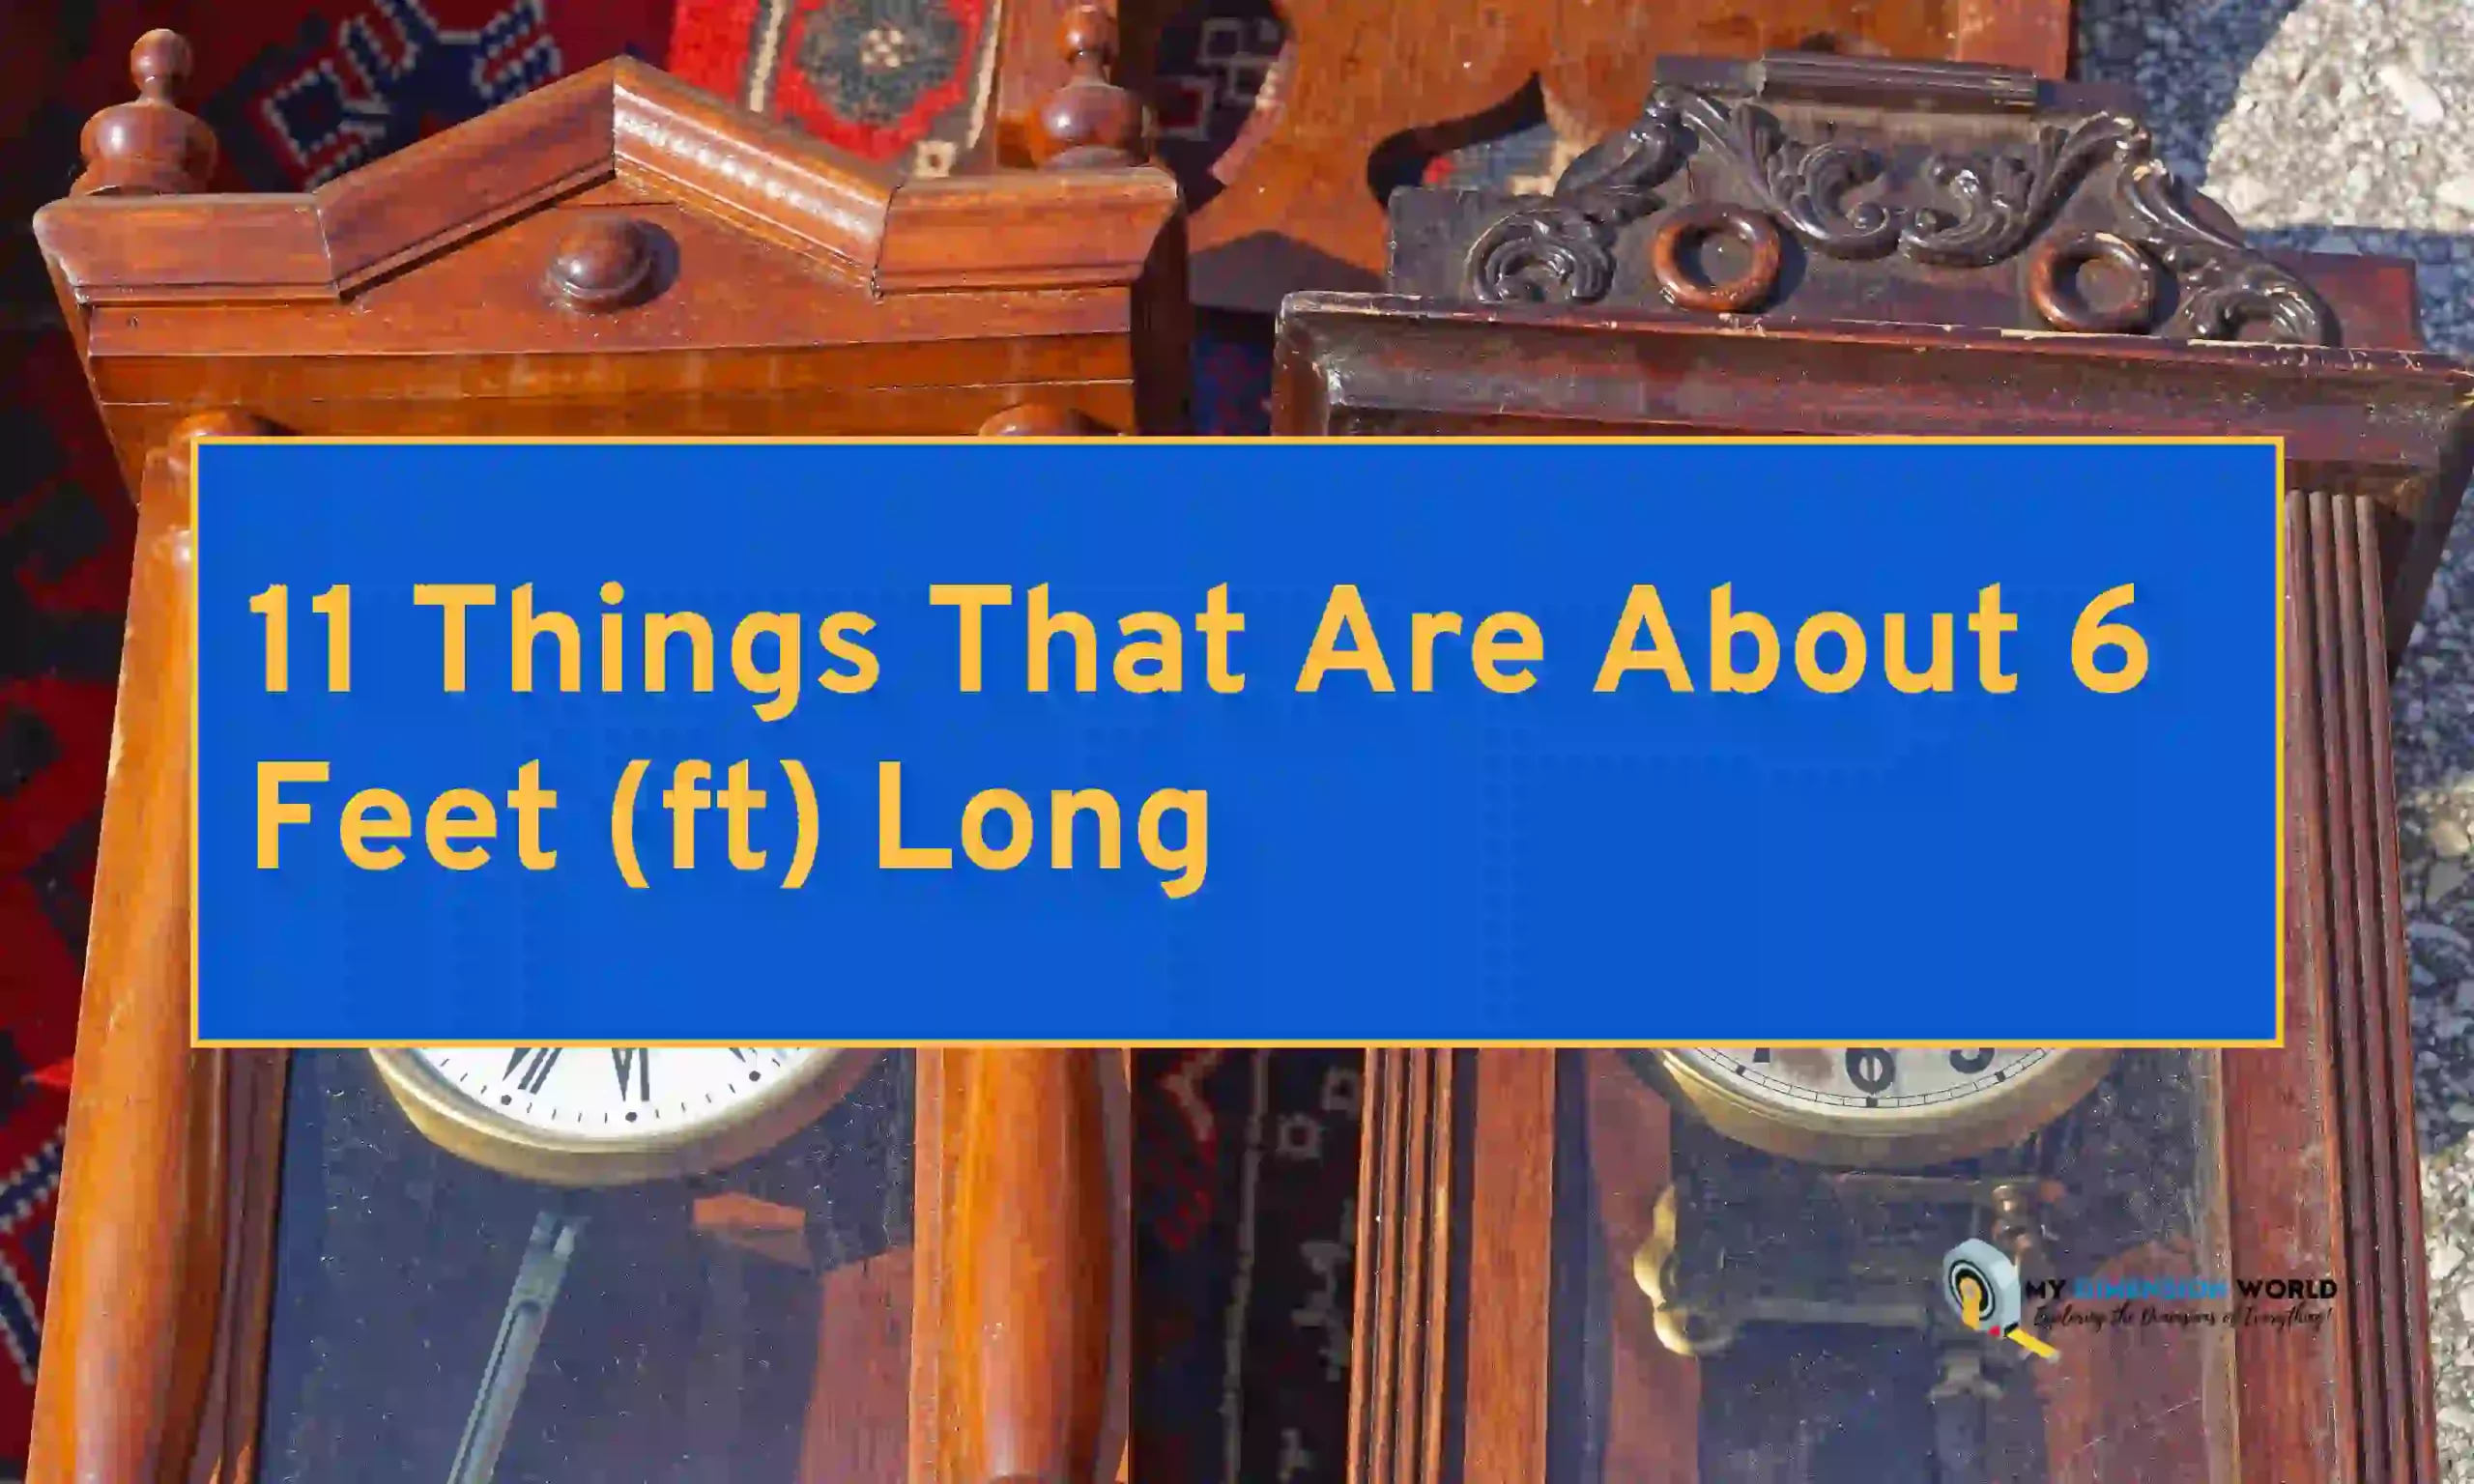 11 Things That Are About 6 Feet (ft) Long